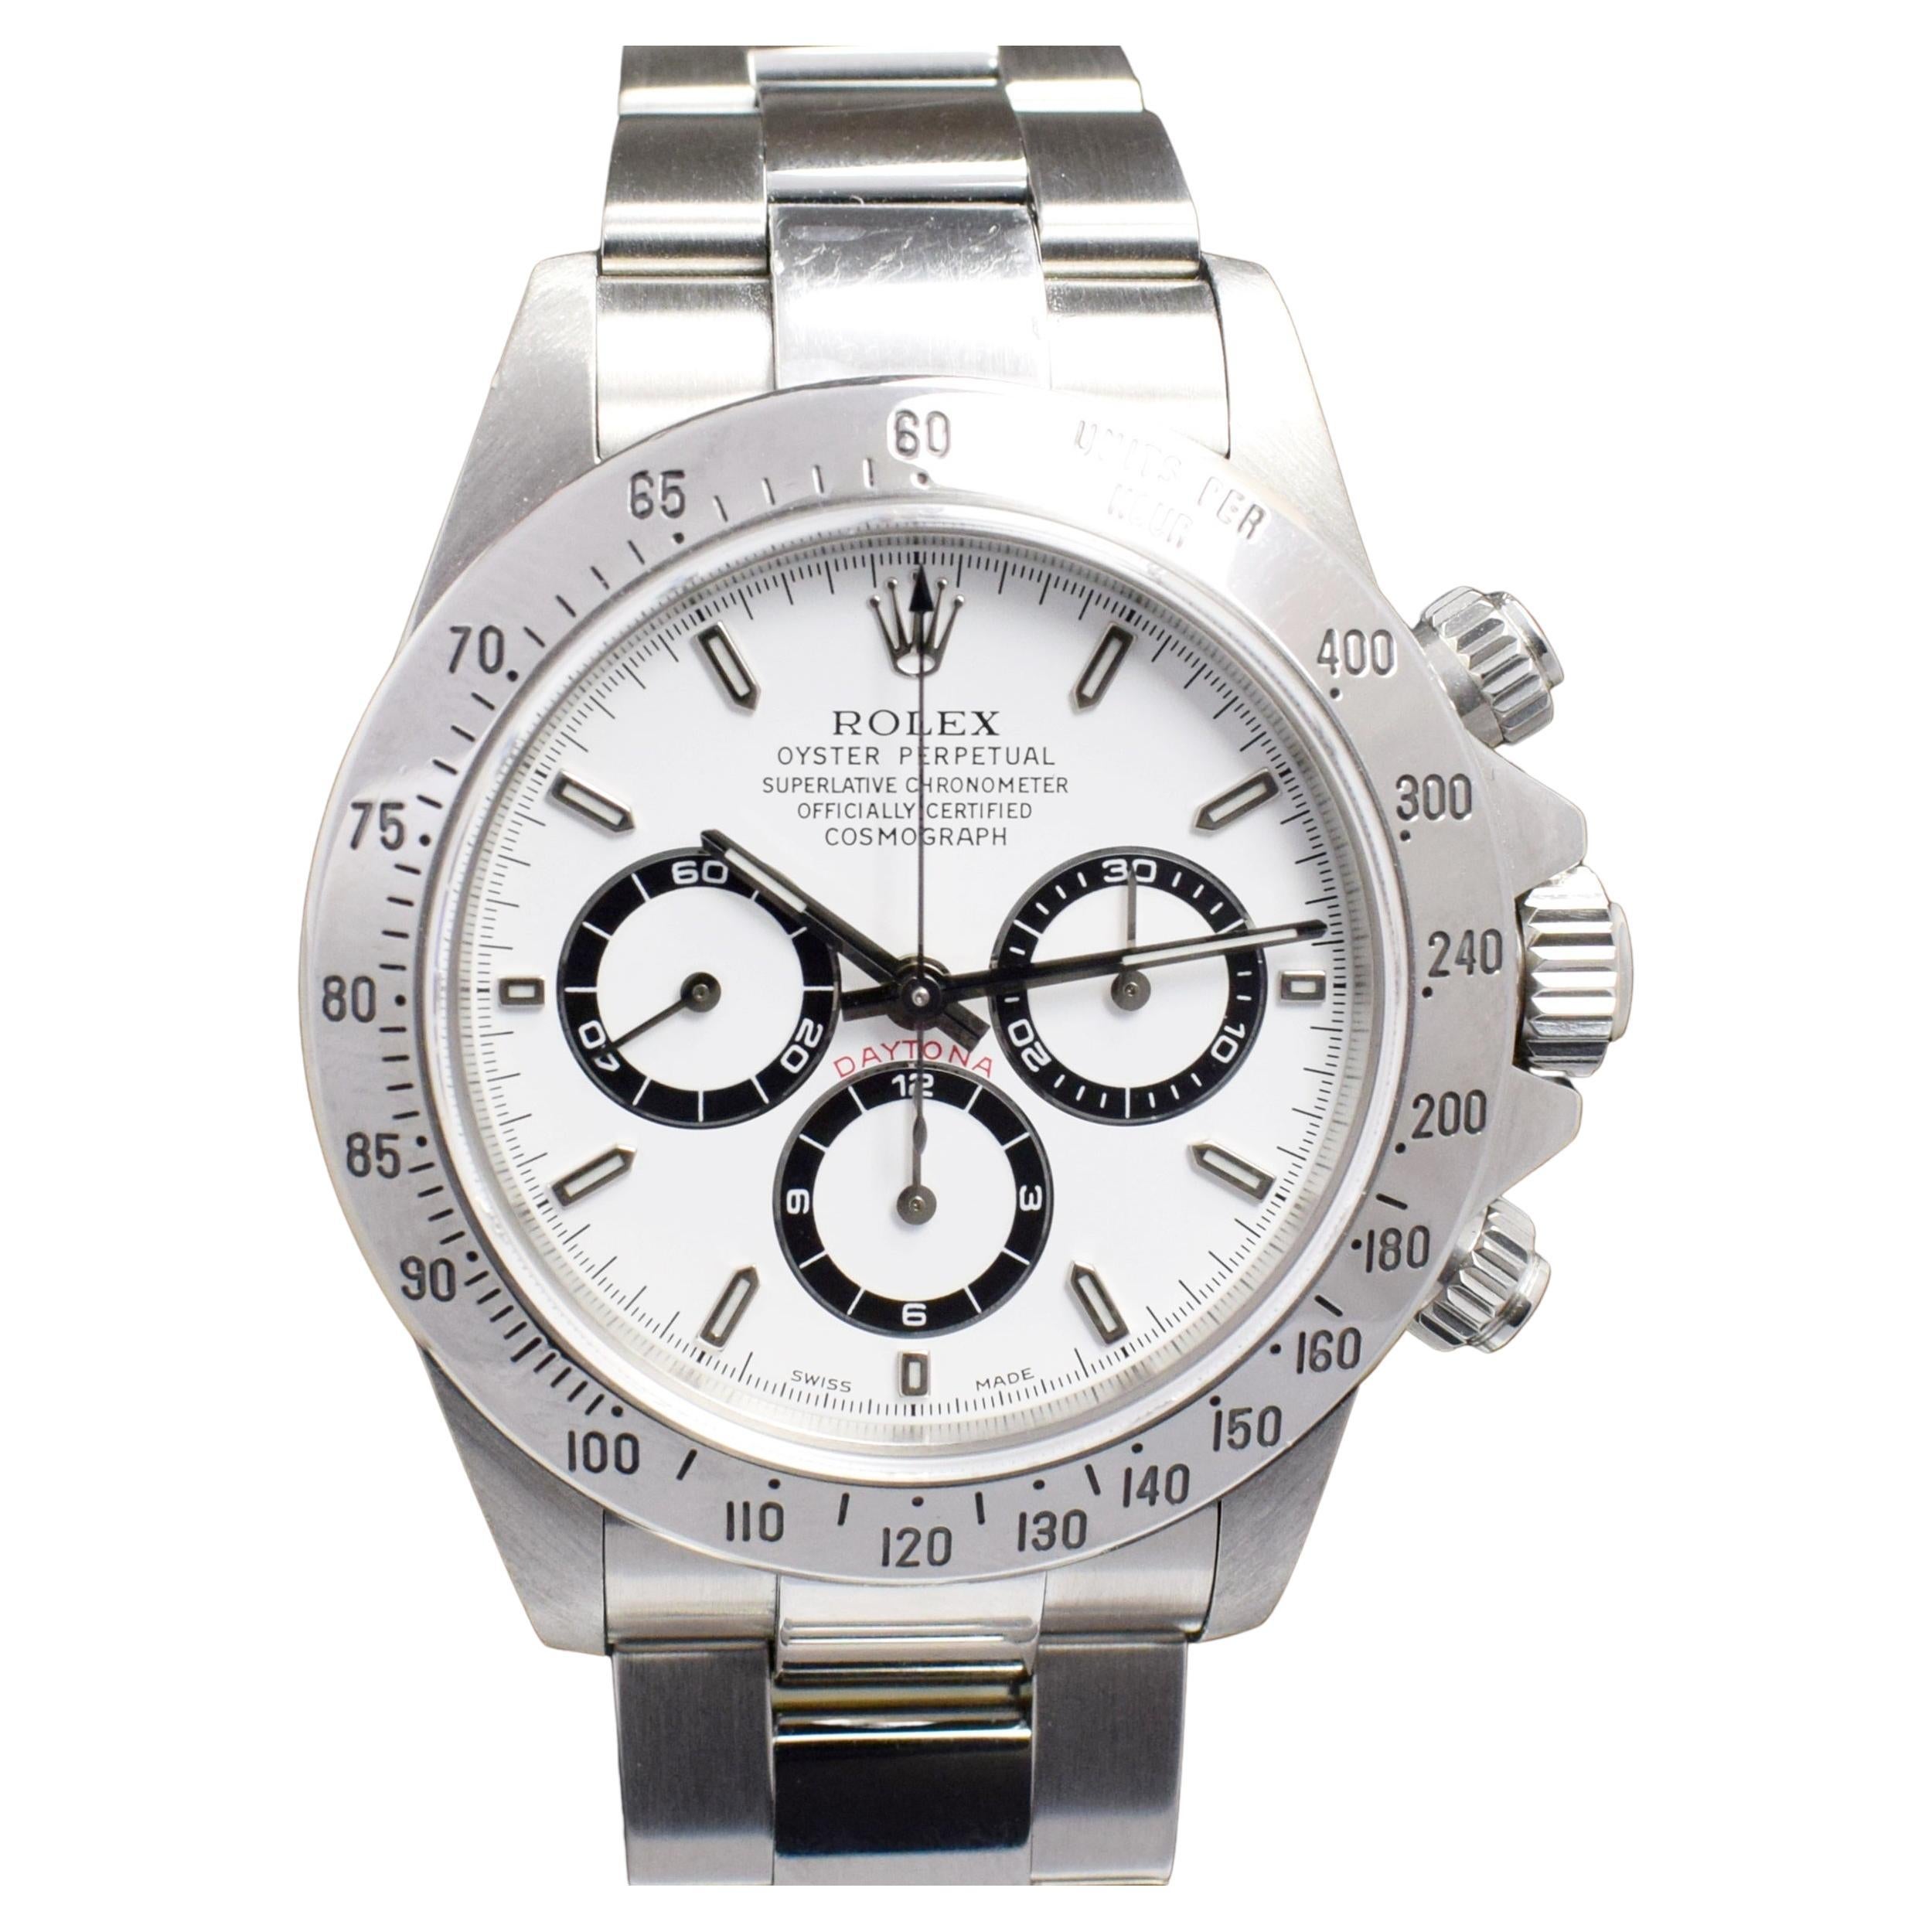 Rolex Daytona Steel White Dial 16520 Cosmograph Chronograph Watch and  Paper, 1998 For Sale at 1stDibs | new rolex daytona retail price, rolex  daytona 1998, rolex daytona 16520 white dial